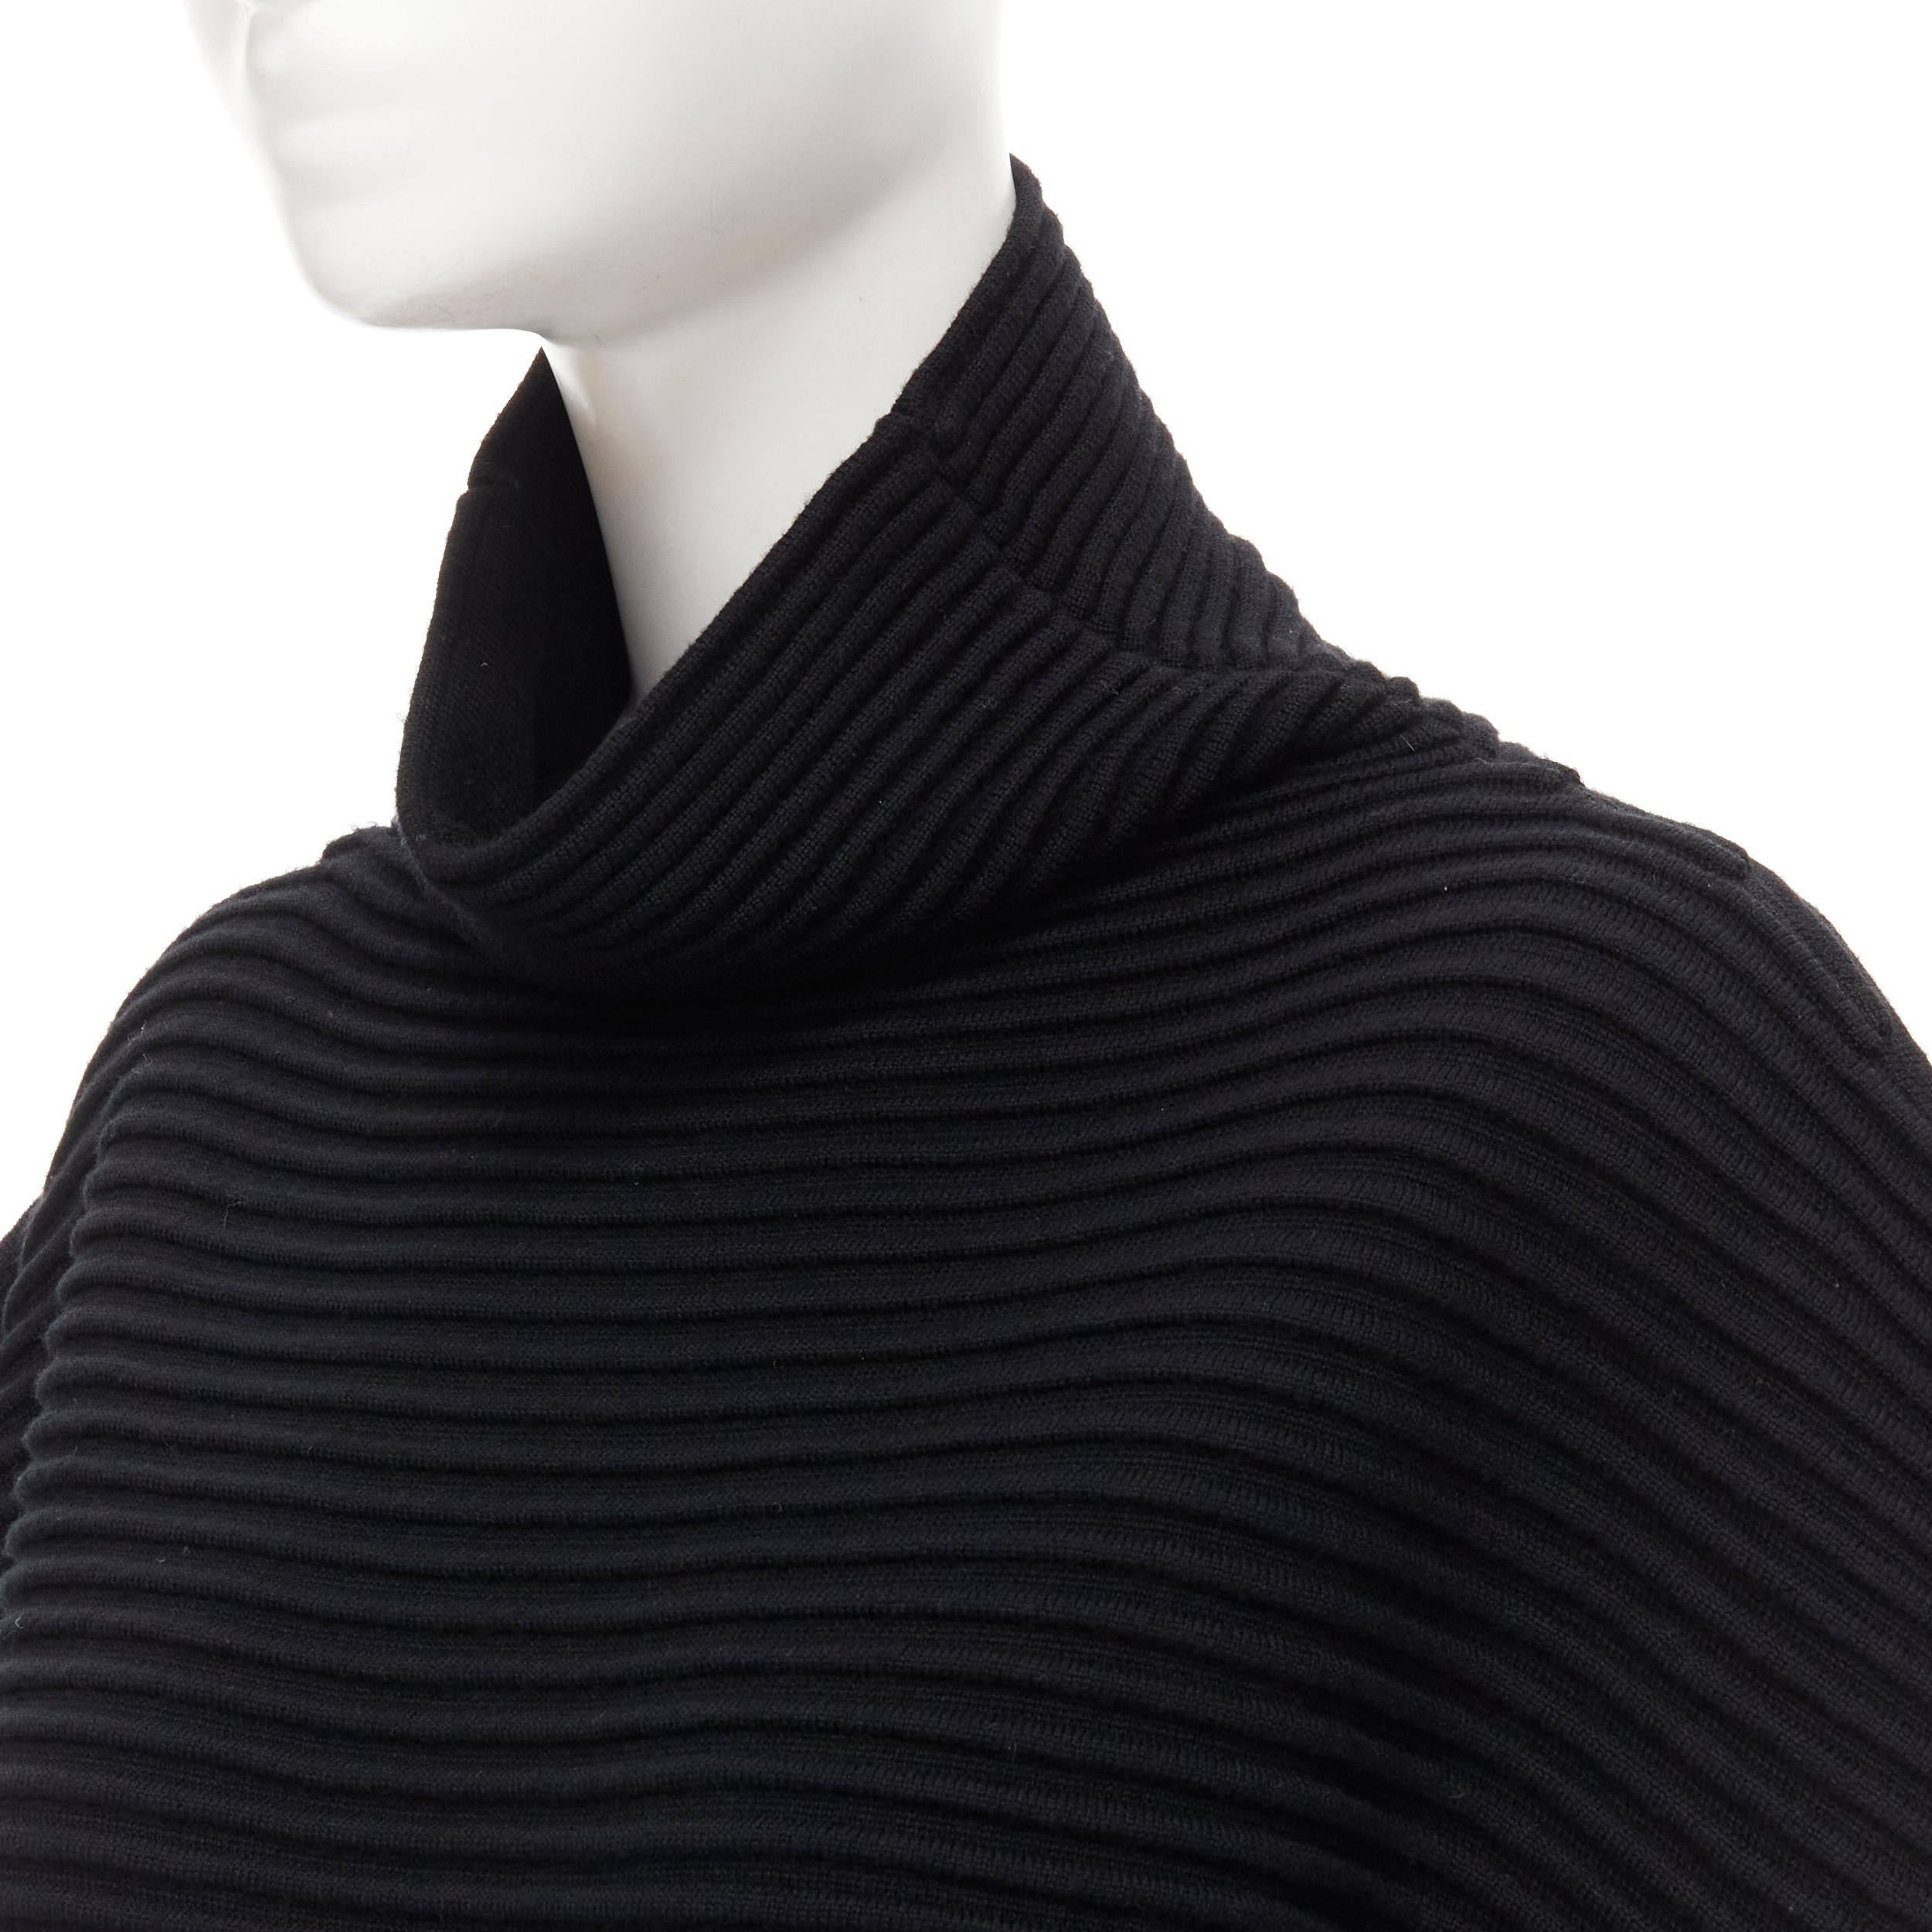 VVB VICTORIA BECKHAM 100% wool black ribbed cap sleeve popover sweater US2 S 
Reference: KEDG/A00089 
Brand: Victoria Victoria Beckham 
Material: Wool 
Color: Black 
Pattern: Solid 
Made in: China 

CONDITION: 
Condition: Excellent, this item was